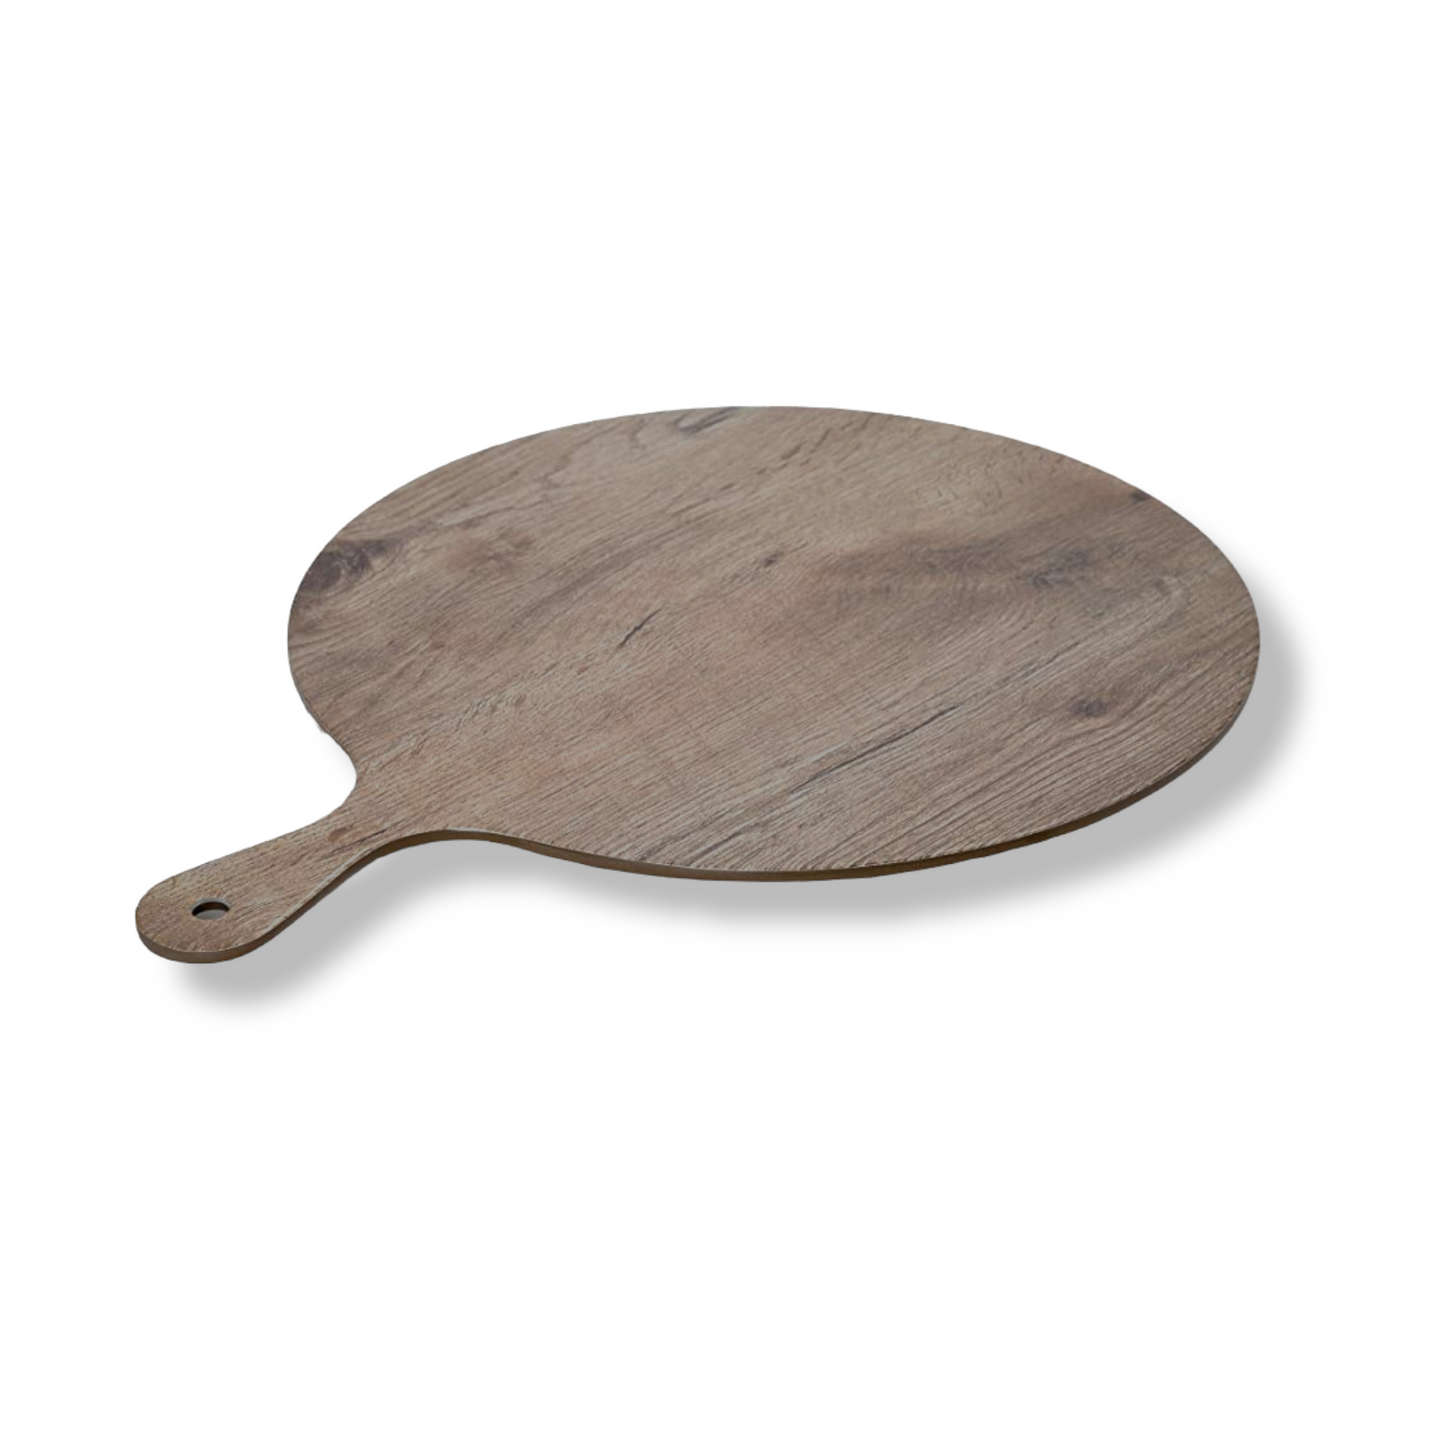 36 Cm Melamine round plate with a handle and a wooden-look finish - Lunaz Shop